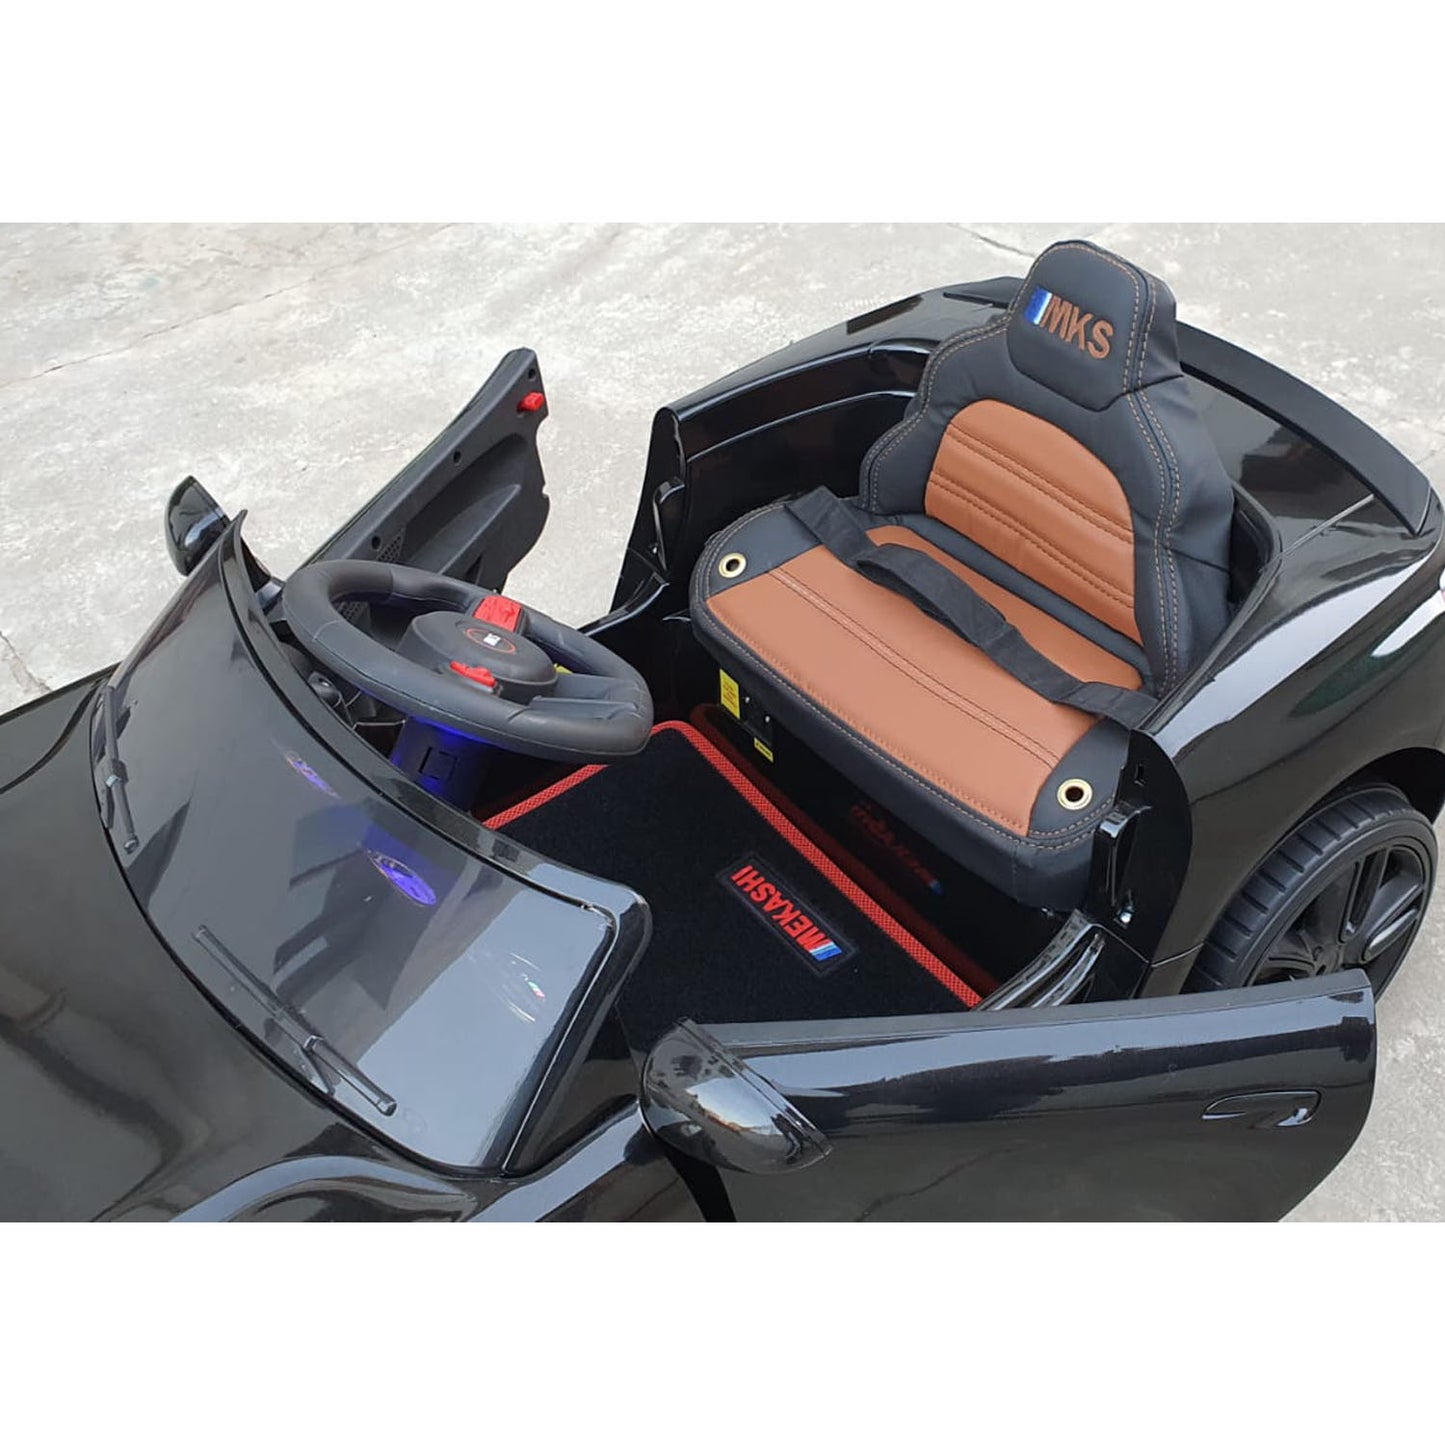 Mekashi Made in india Battery operated ride on car for kids | Model No. MKS-003D | Leather seat